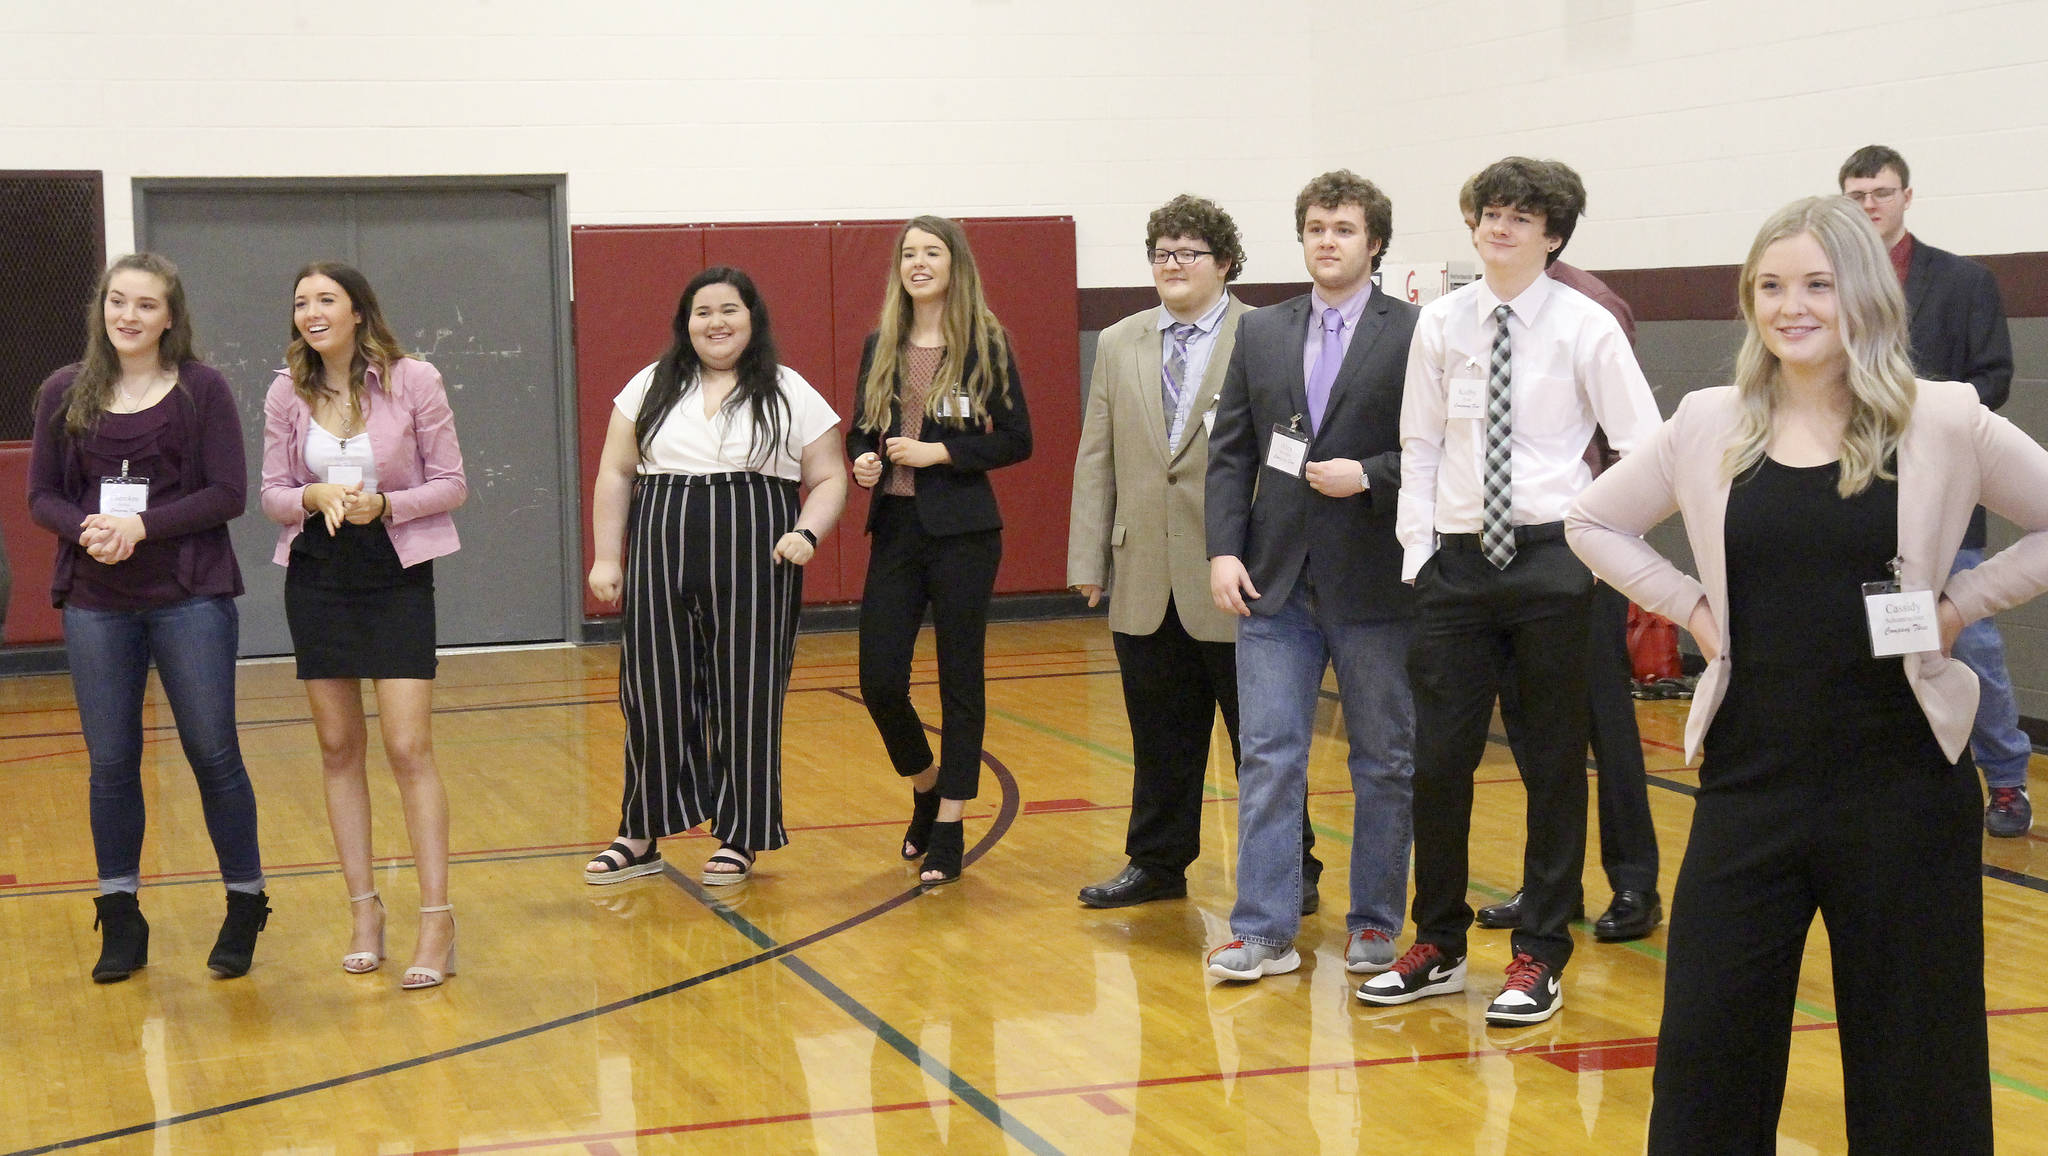 Business week helps Monte students experience stepping out of their comfort zones